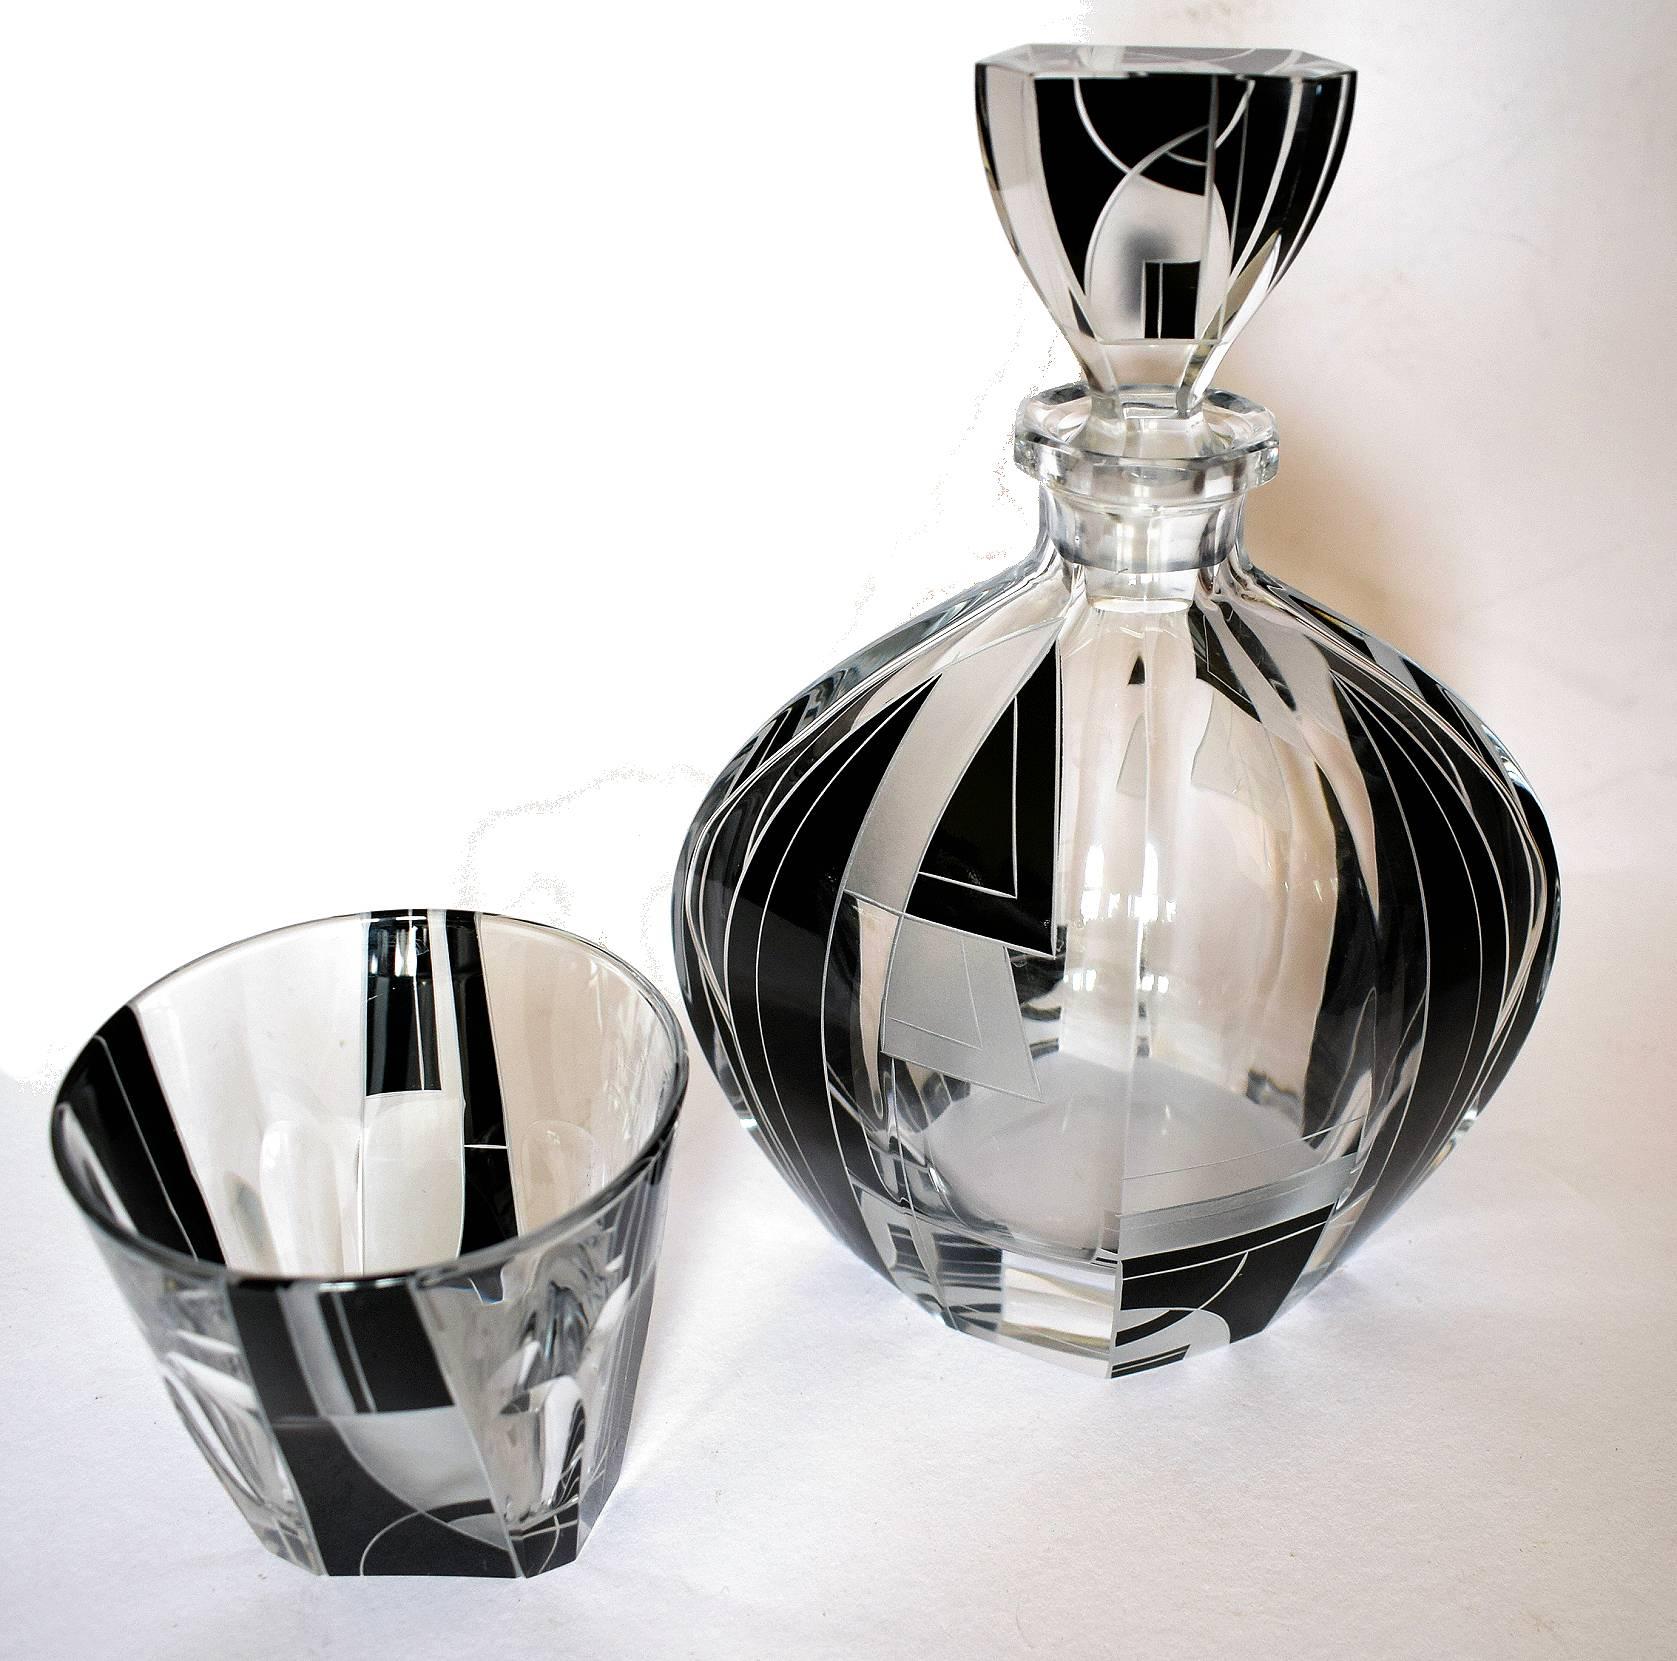 Fabulous 1930s Art Deco decanter set by Karl Palda. Comprises a heavy cut-glass decanter, stopper and four tumbler glasses, all with enamel geometric decoration. This wonderful set oozes quality. All in perfect condition. The drinking glasses are